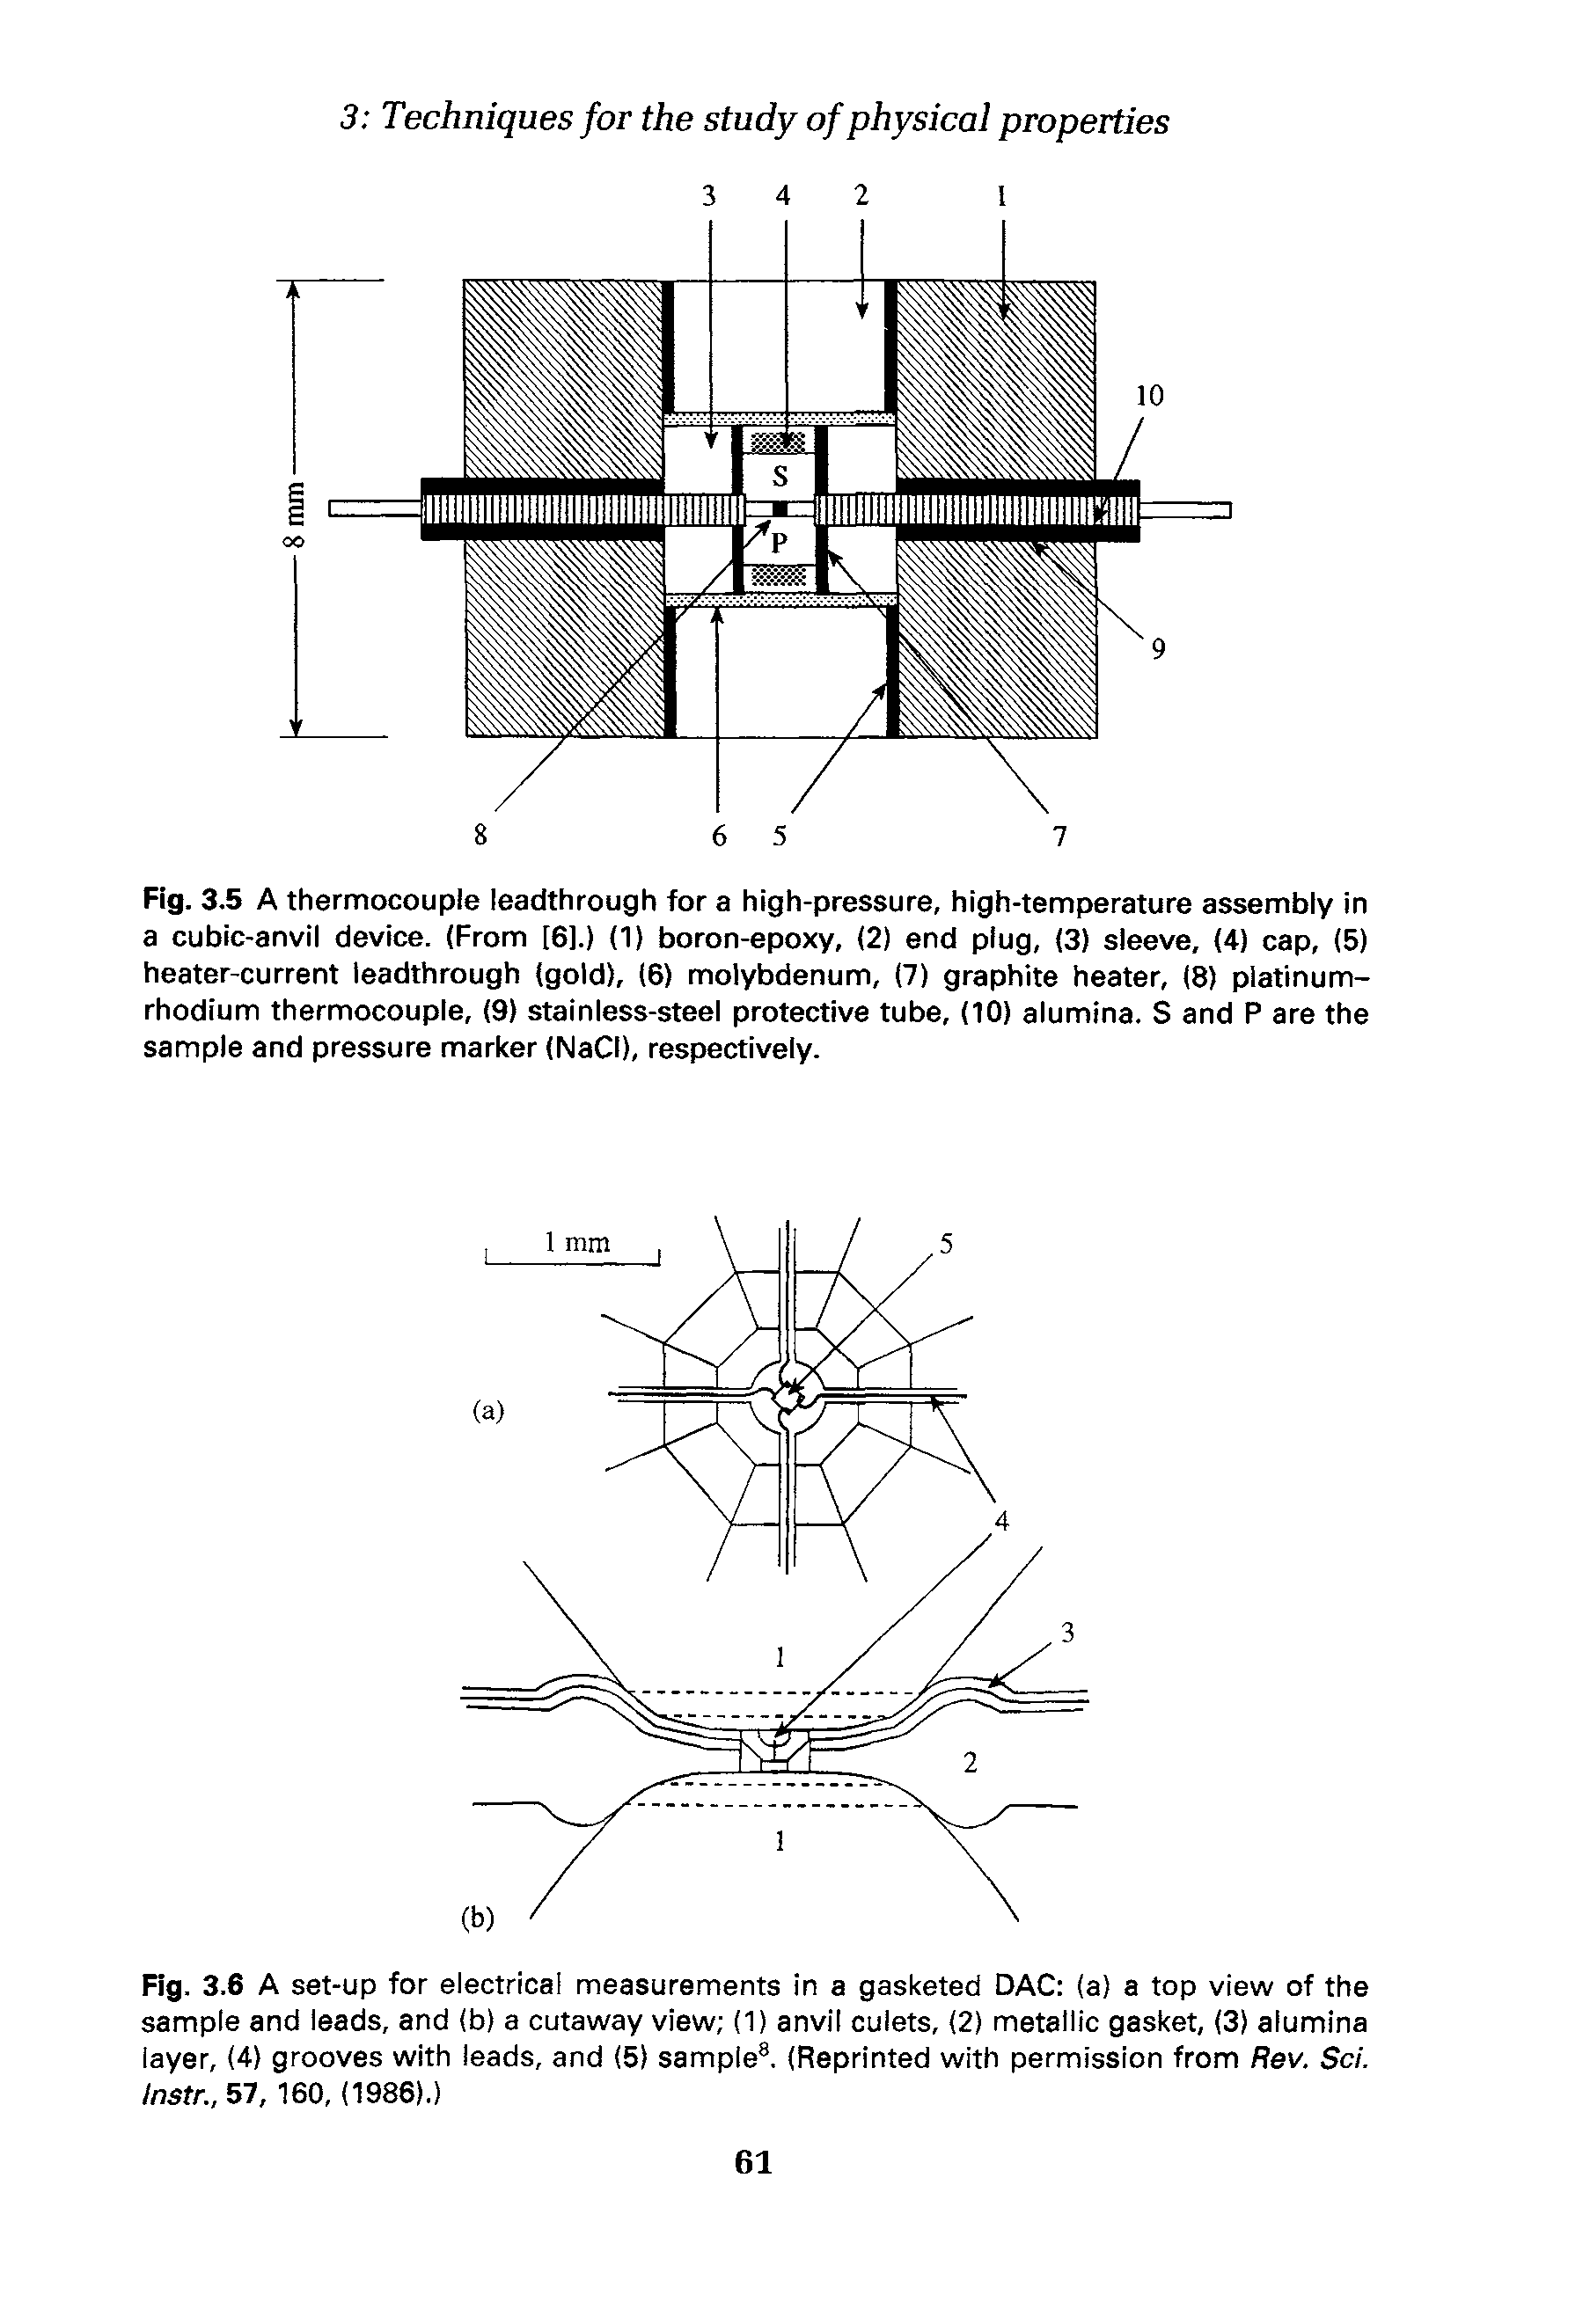 Fig. 3.6 A set-up for electrical measurements in a gasketed DAC (a) a top view of the sample and leads, and (b) a cutaway view (1) anvil culets, (2) metallic gasket, (3) alumina layer, (4) grooves with leads, and (5) sample , (Reprinted with permission from Rev. Sci. Instr., 57, 160, (1986).)...